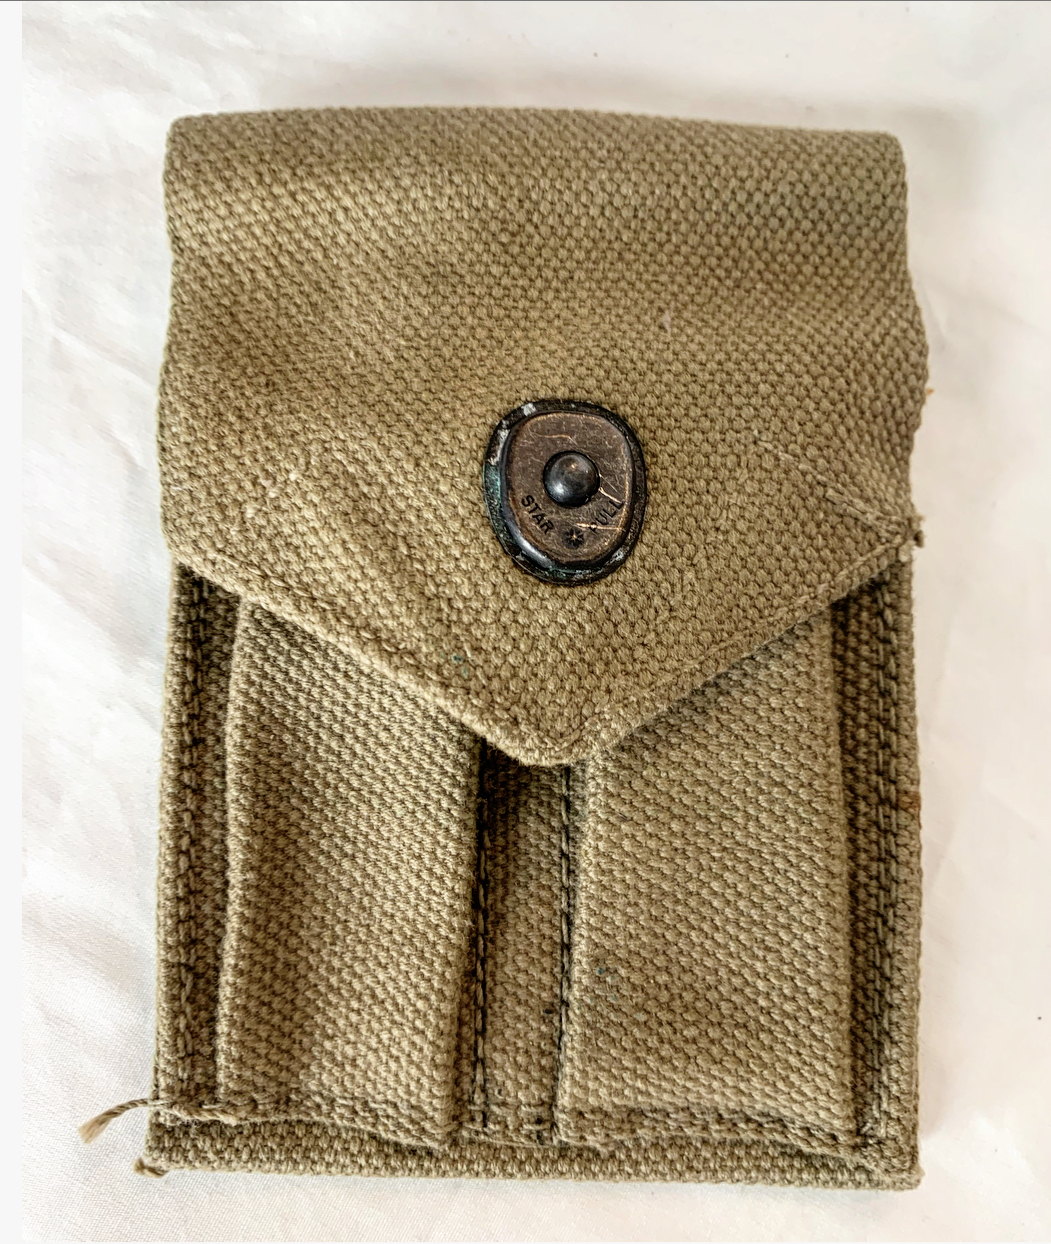 SOLD 1942 dated - 1911 pistol, 45 cal canvas mag pouch...MINT! - Pre98 ...